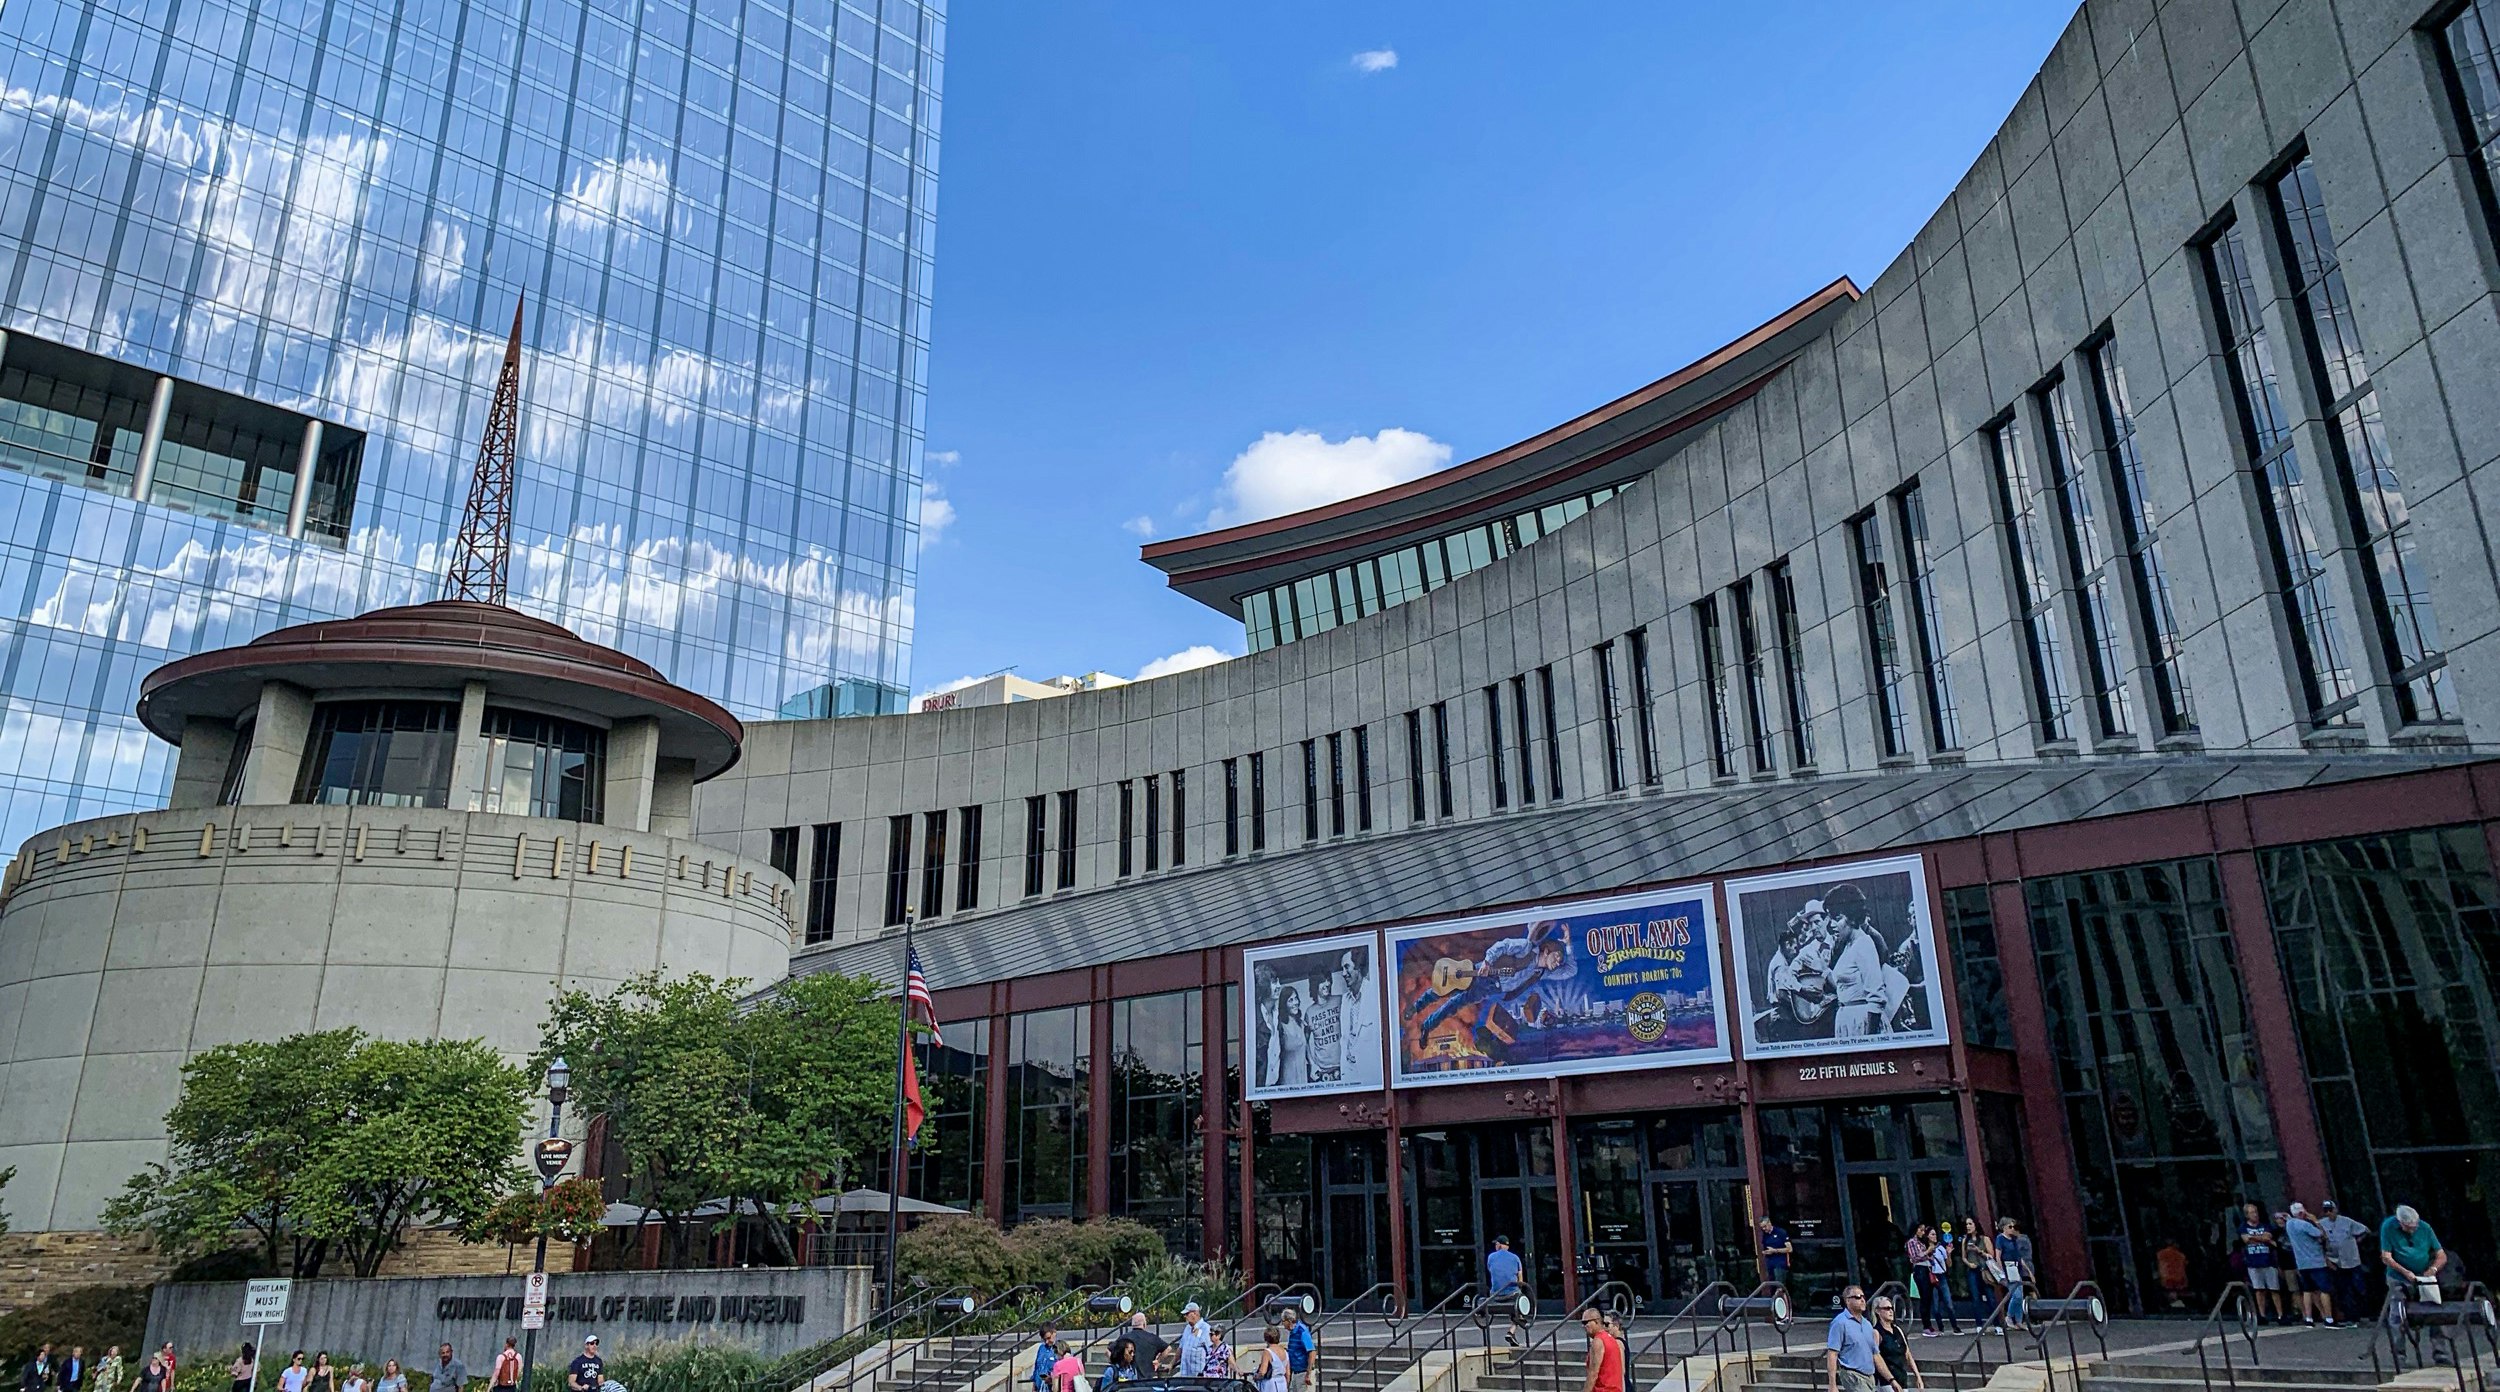 The country music hall of fame in Nashville is seen on a sunny day; best country music venues in Nashville